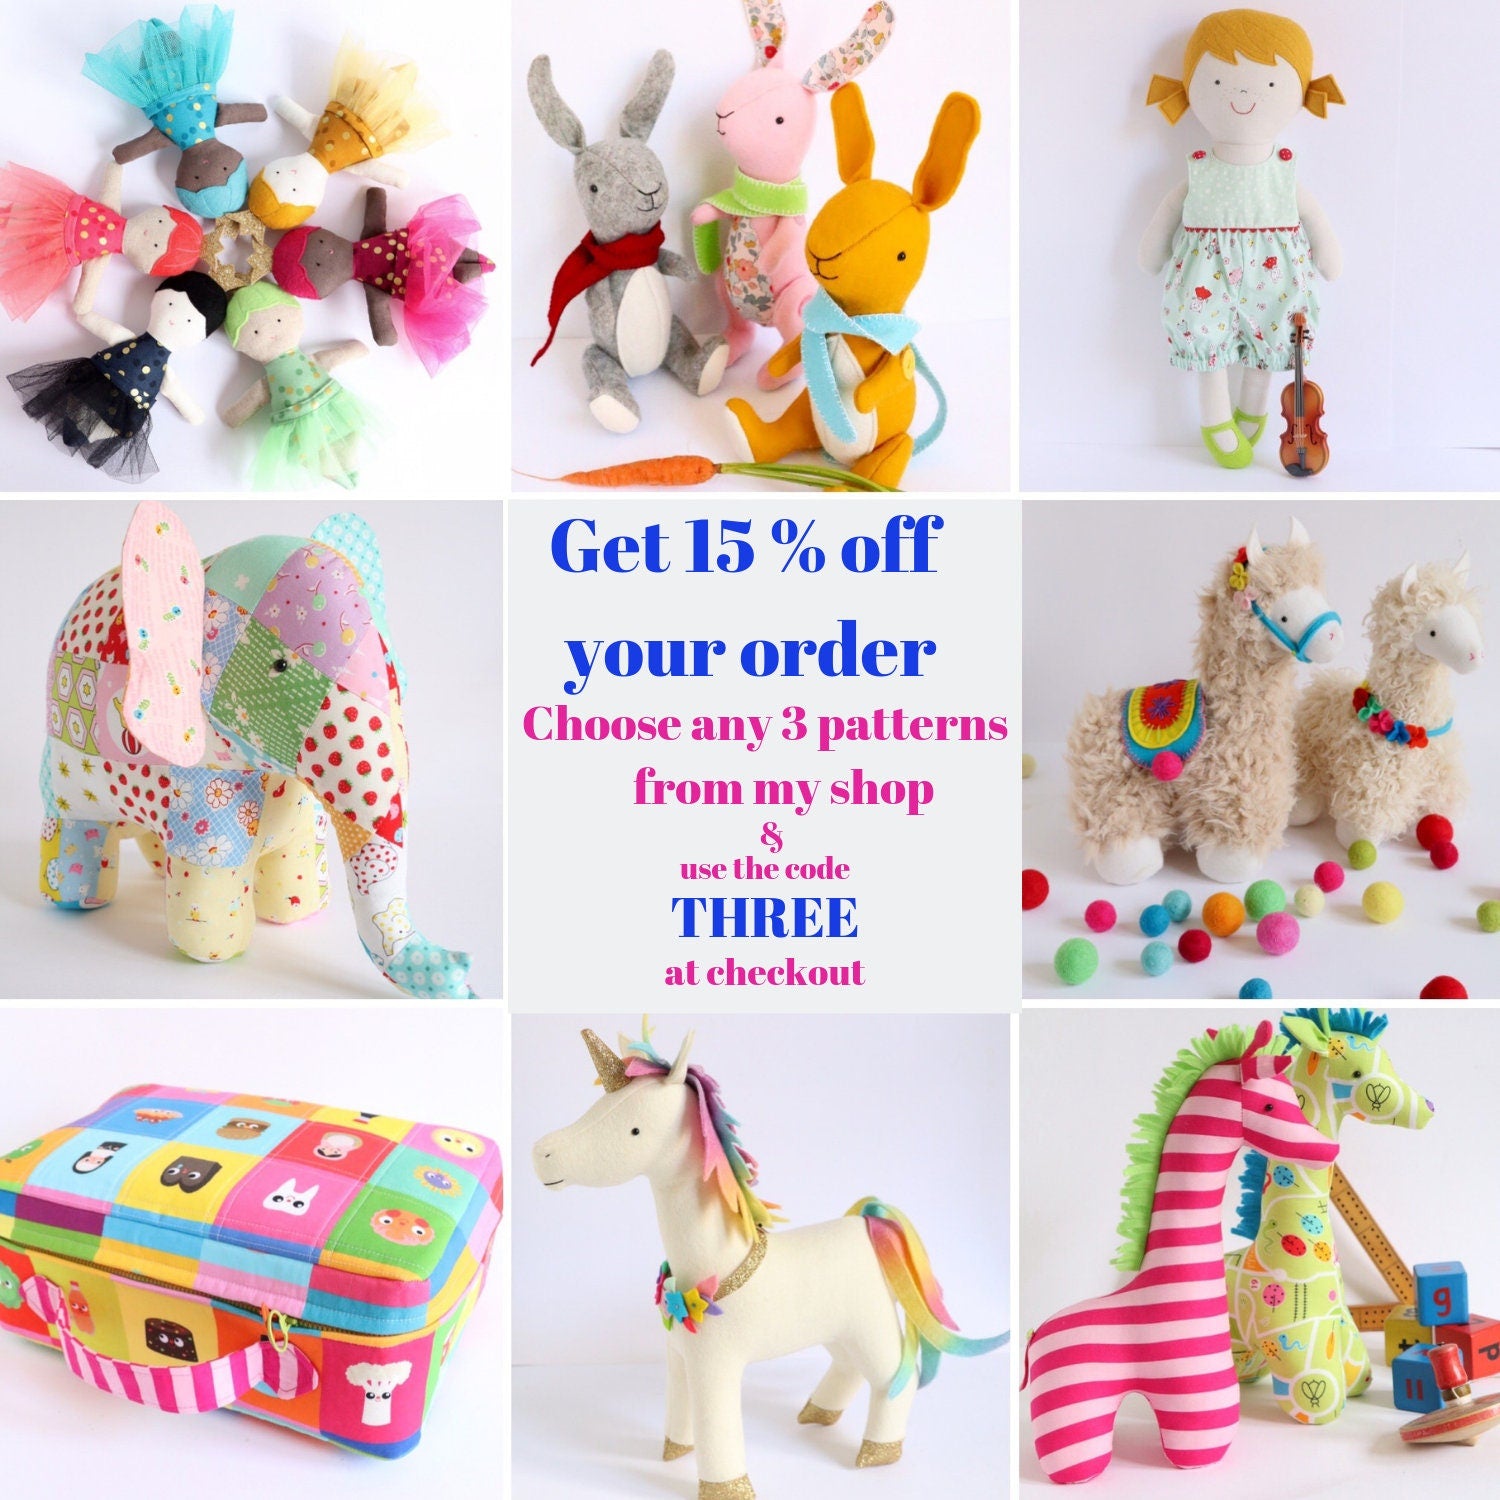 Image displaying buy any three patterns for 15 % off